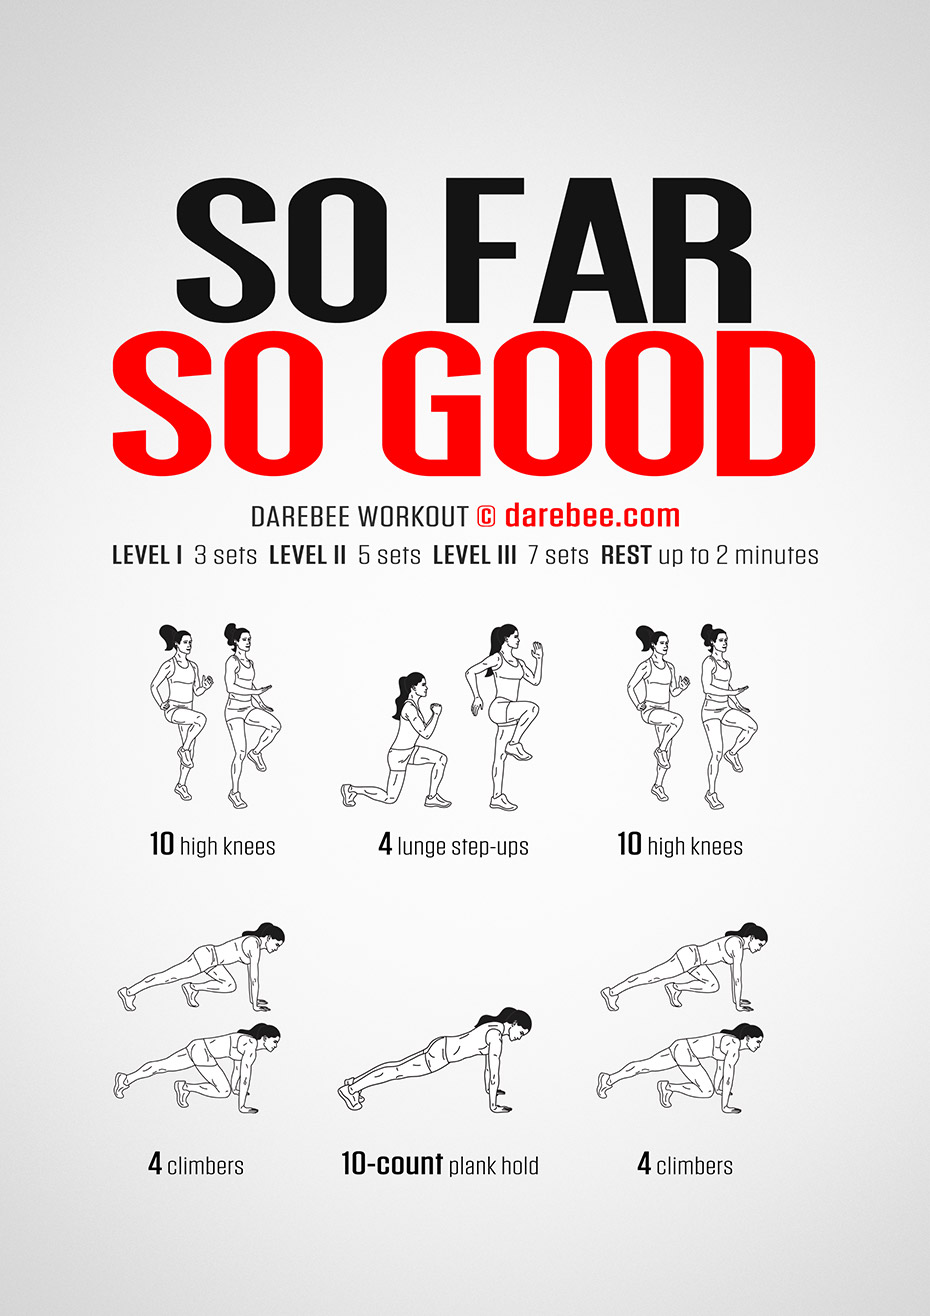 So Far So Good is a DAREBEE home fitness no-equipment workout that helps you develop amazing lower body strength and aerobic endurance at home.